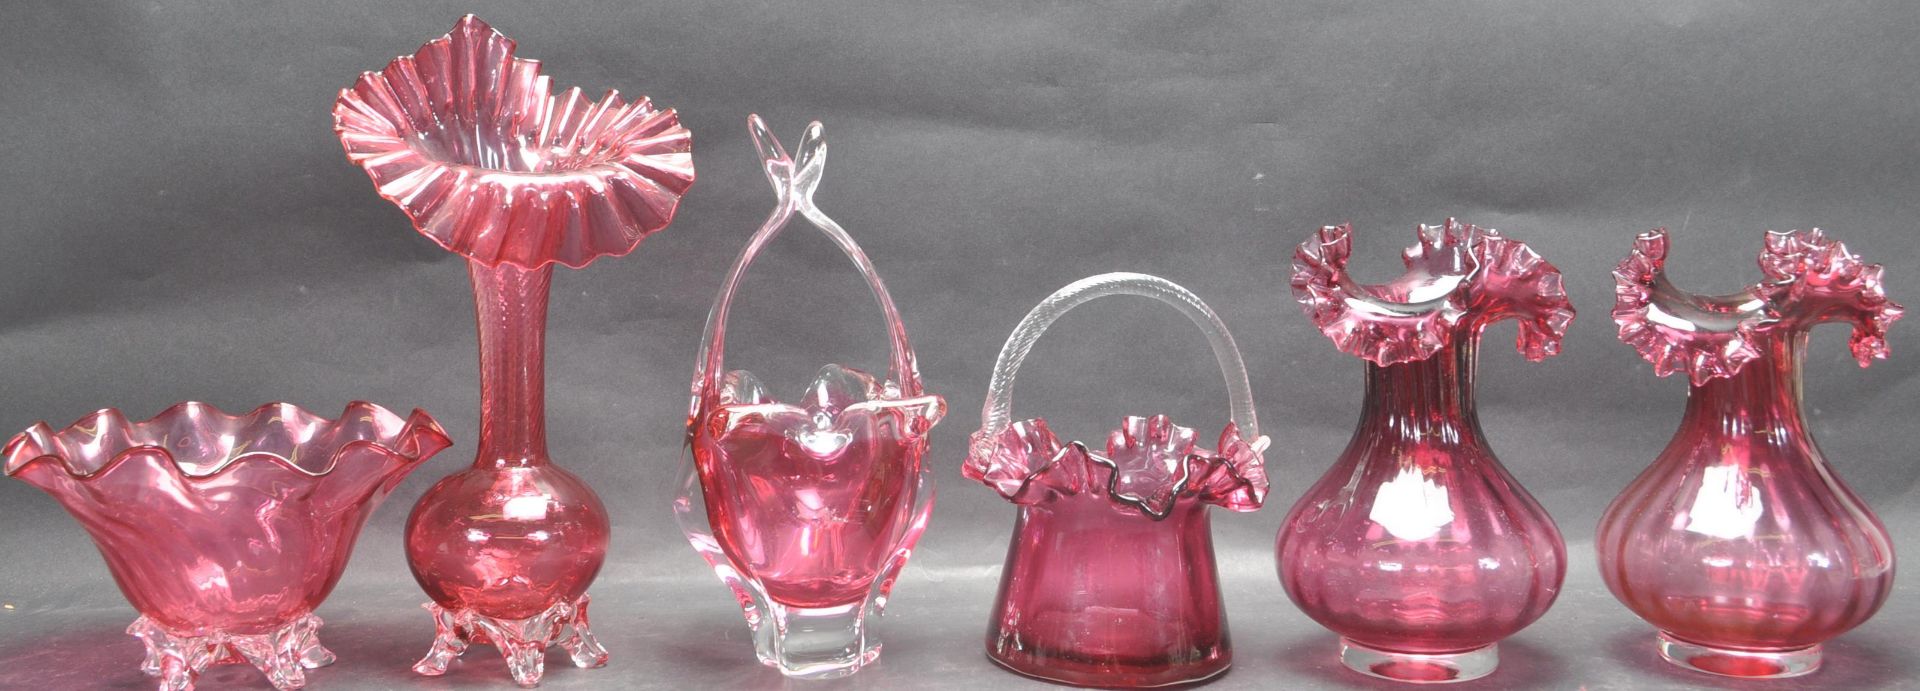 GROUP OF CRANBERRY GLASS ORNAMENTS